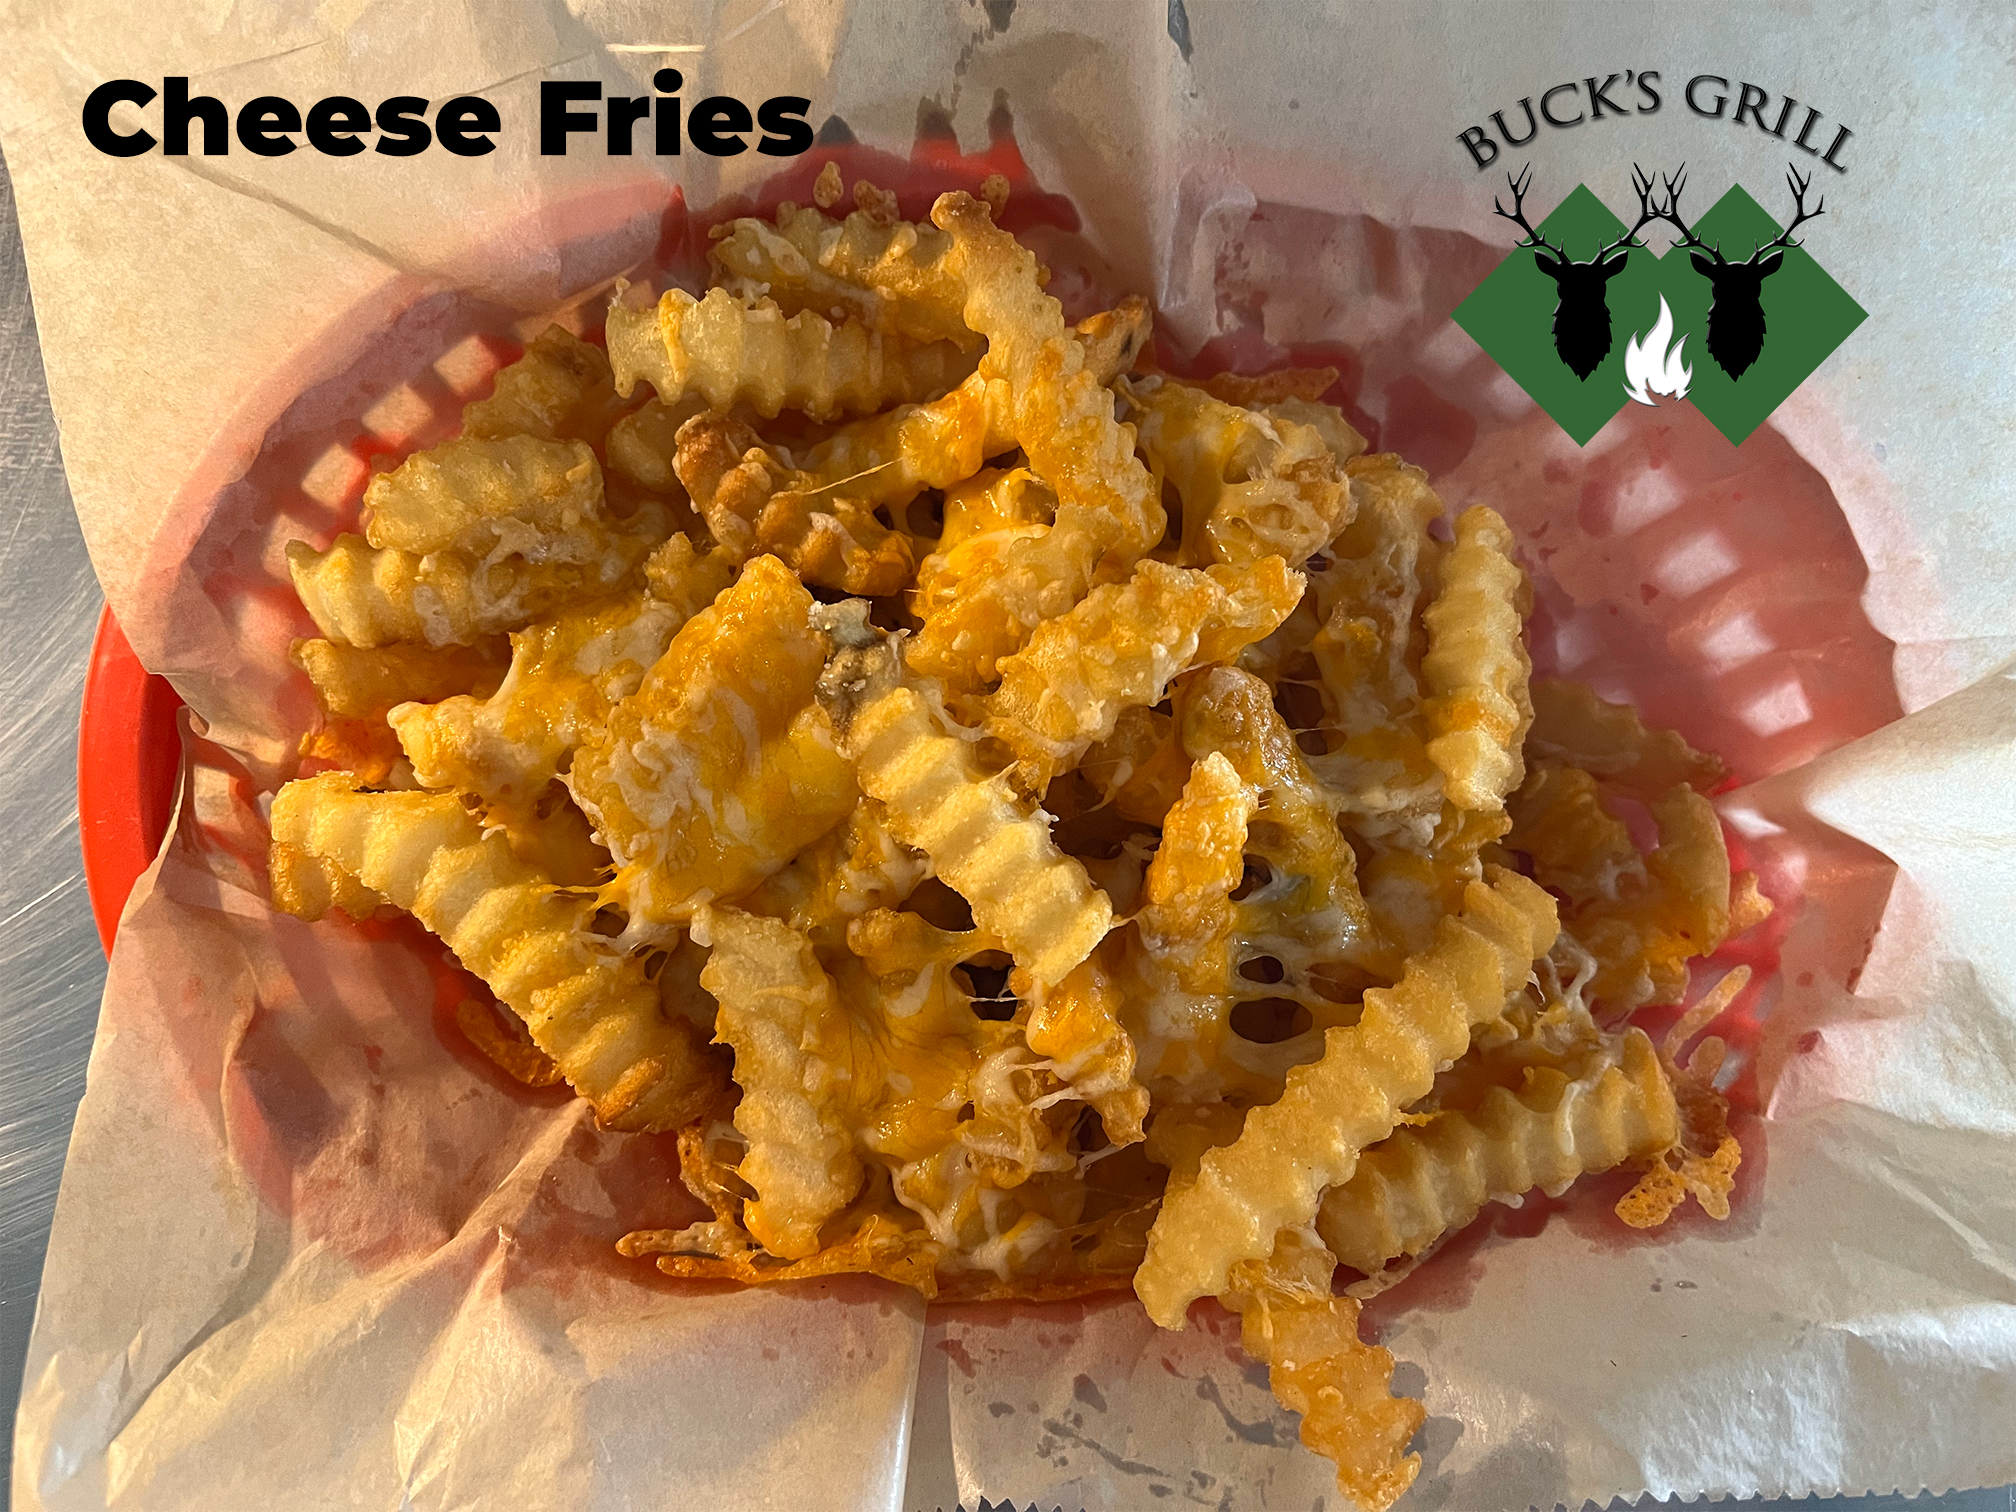 Cheese Fries at Bucks Grill